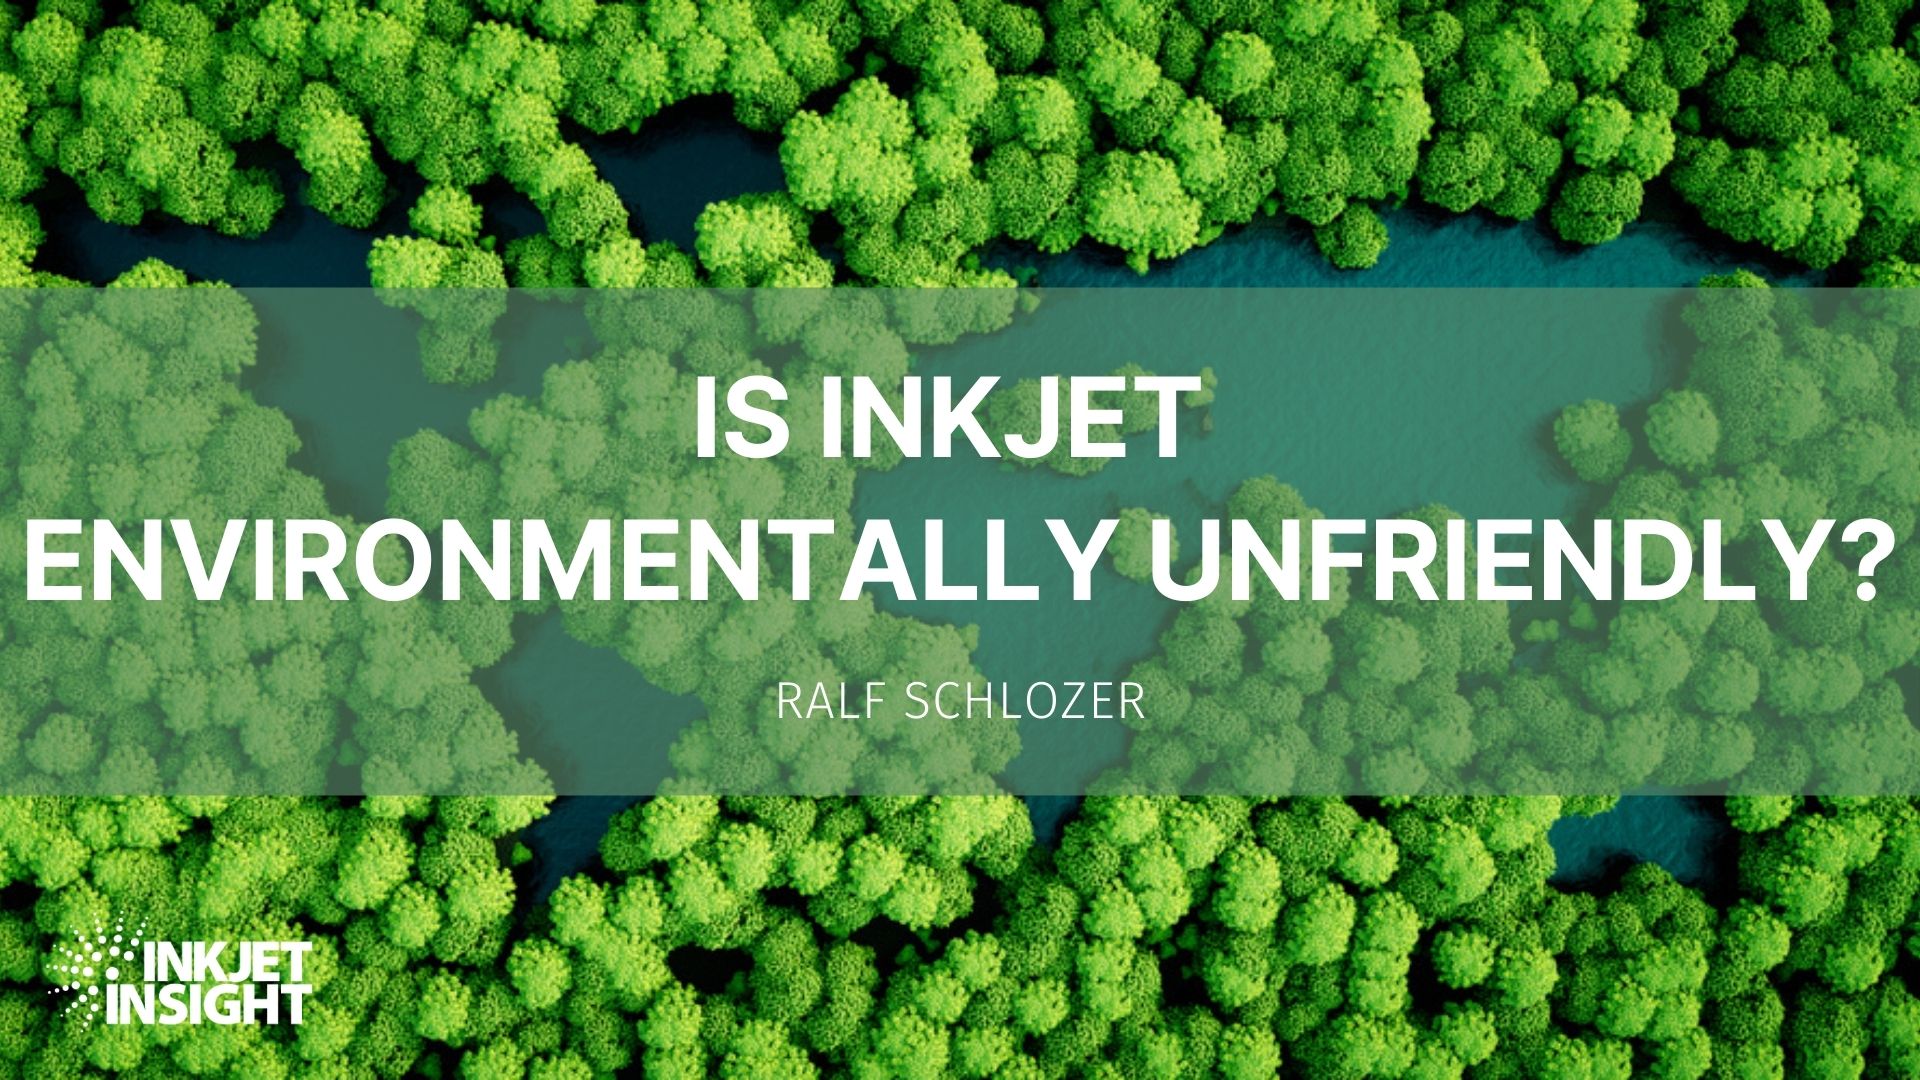 Featured image for “Is Inkjet Environmentally Unfriendly?”